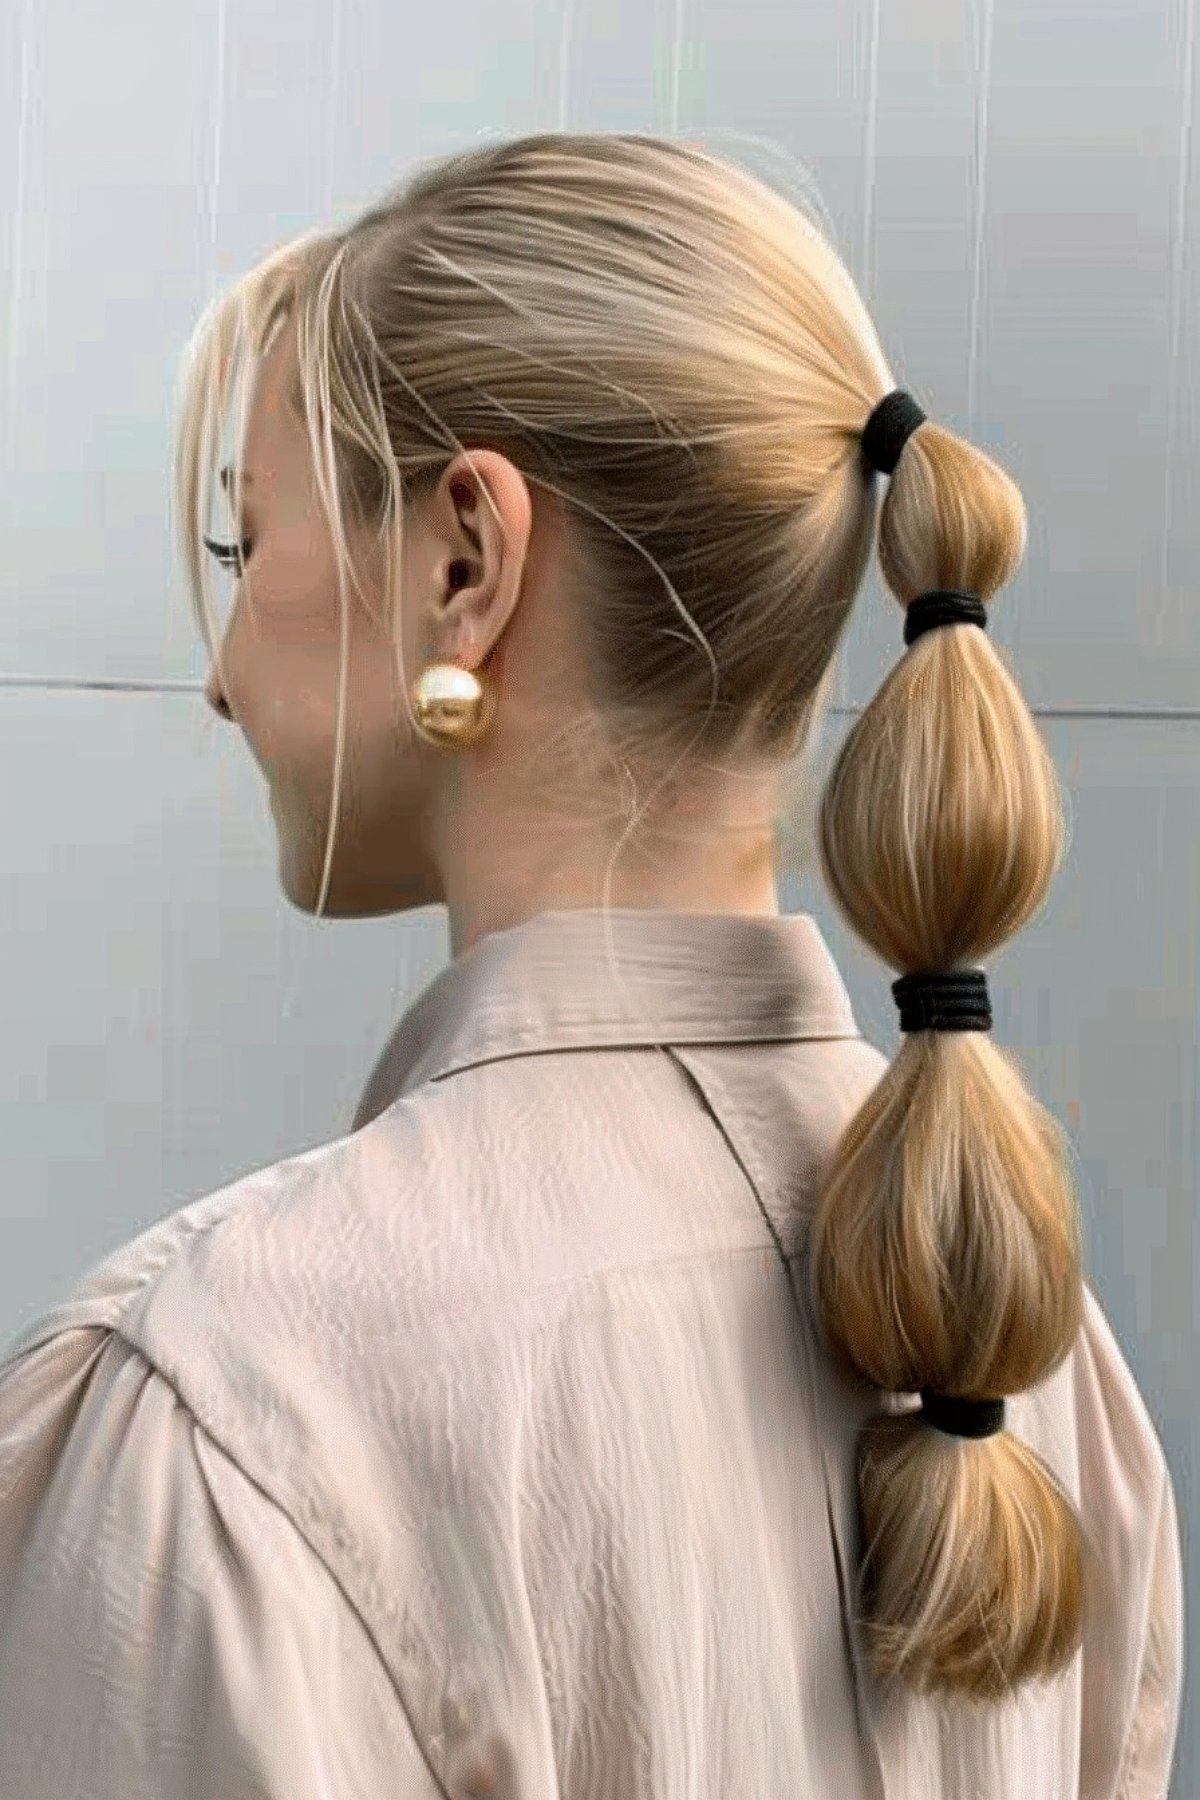 A sleek ponytail with evenly spaced bubble braids for an effortlessly stylish look, ideal for straight, long hair.